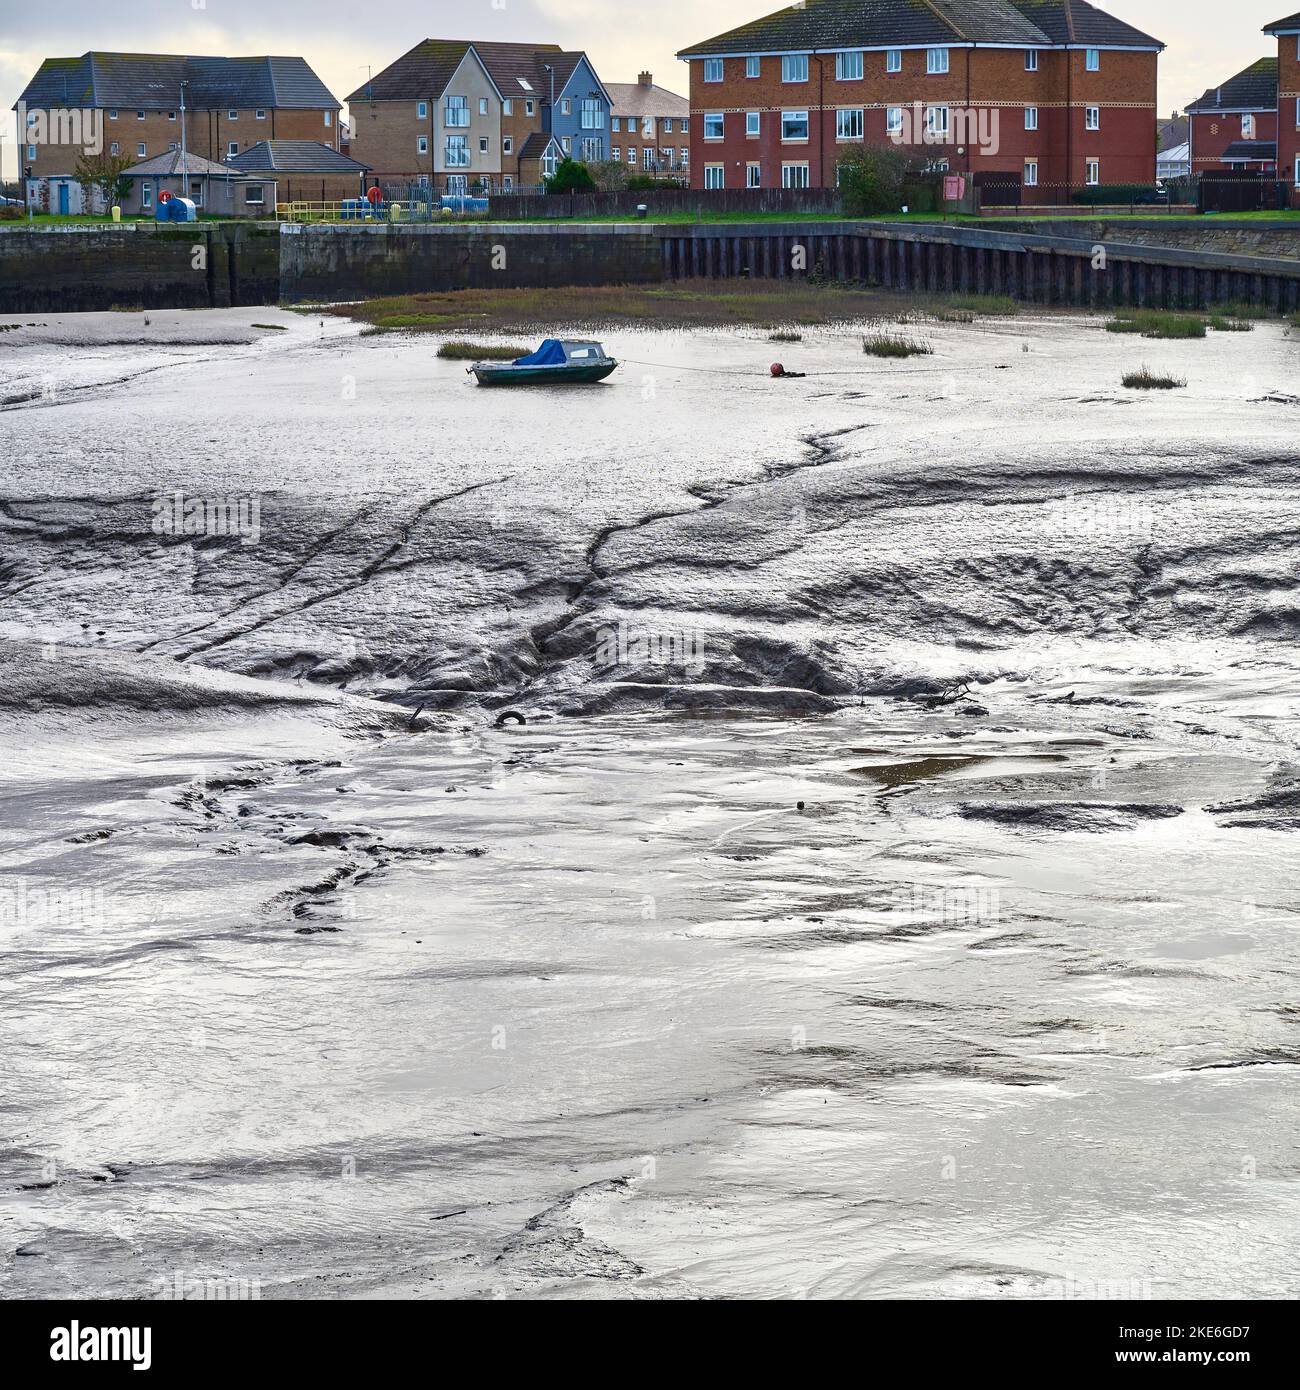 Jubilee Quay,Fleetwood, at low tide showing thick mud Stock Photo